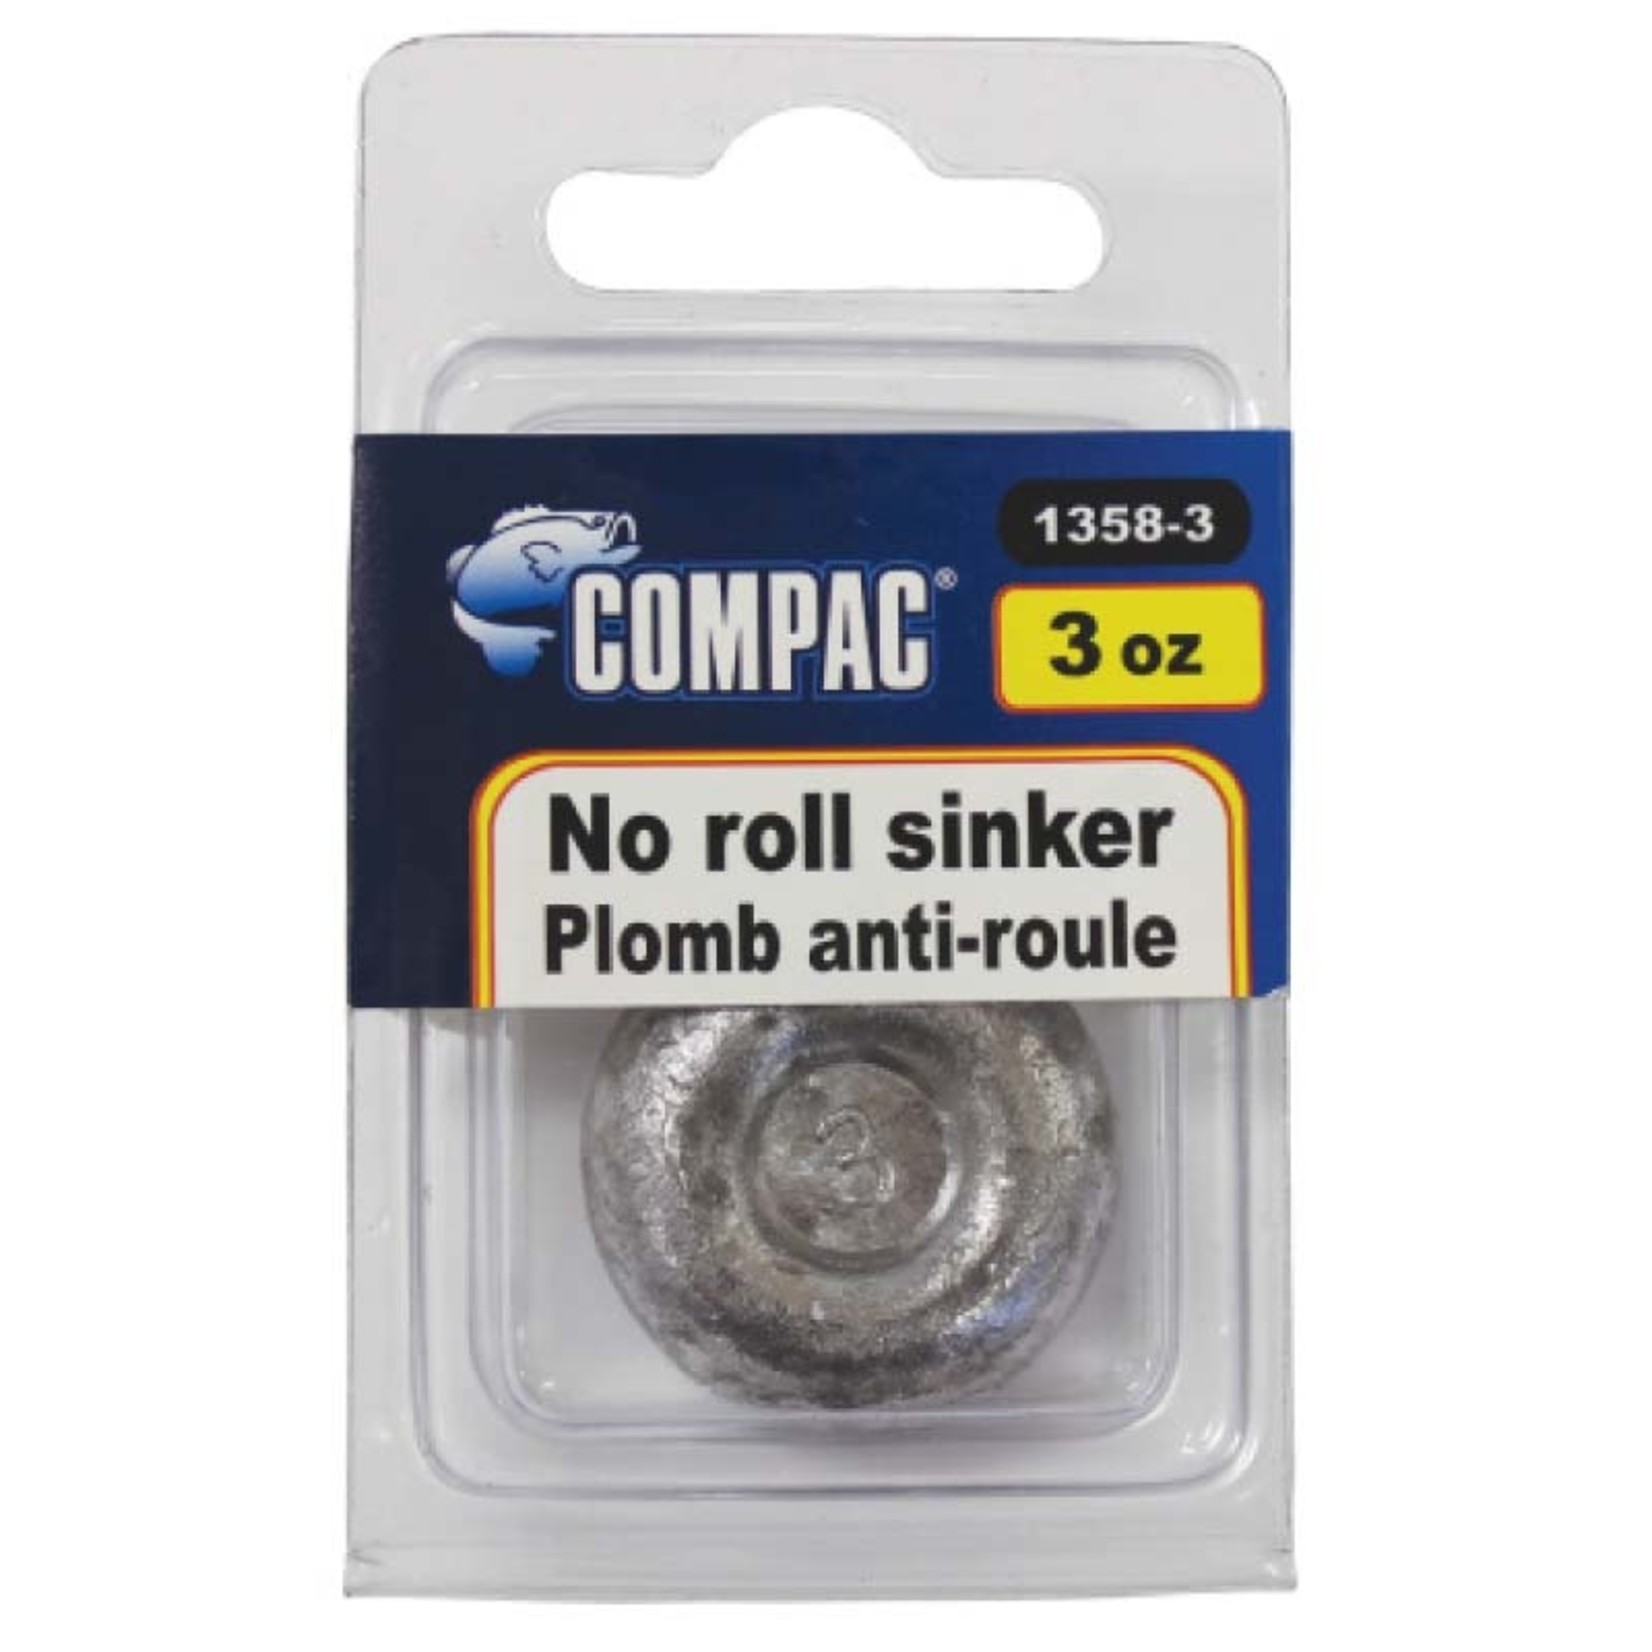 Compac Compac Plombs anti-roule